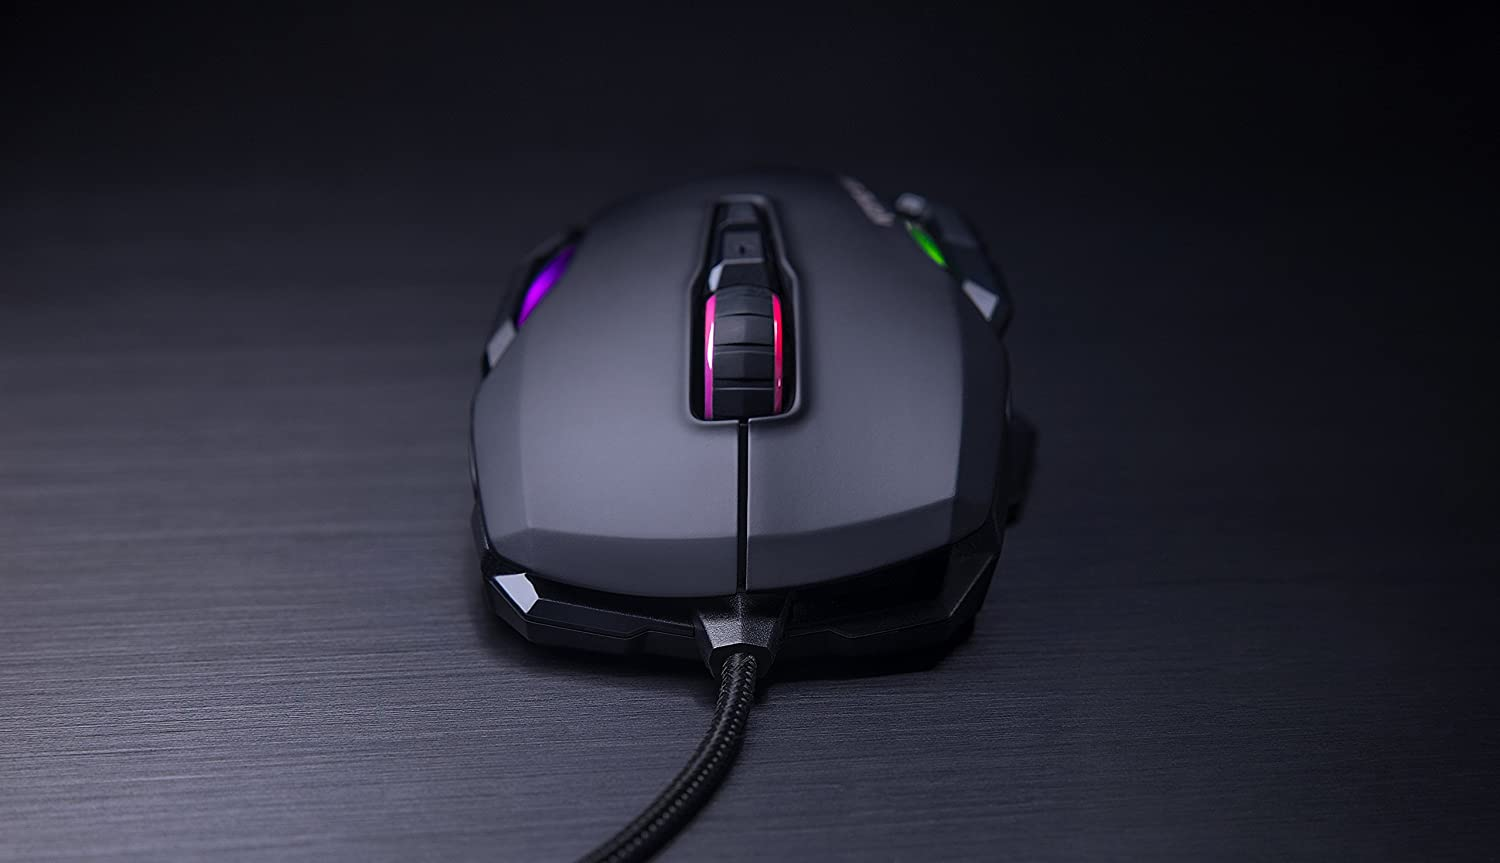 Roccat Https://Youtu.be/Mfk3Bmiiu8C Roccat® Swarm Powered – Comprehensive Driver Suite With A Striking Design And A Stunning Feature Set, The Kone Aimo Channels The Legacy Of Its Predecessor. It Boasts Refined Ergonomics With Enhanced Button Distinction, But What Truly Sets It Apart Is Its Rgba Double Lightguides Powered By The State-Of-The-Art Aimo Intelligent Lighting System. Aimo Is The Vivid Illumination Eco-System From Roccat®. Its Functionality Grows Exponentially Based On The Number Of Aimo-Enabled Devices Connected. It Also Reacts Intuitively And Organically To Your Computing Behavior. Eliminating The Need For Configuration, It Presents A State-Of-The-Art Lighting Scenario Right Out Of The Box, For A Completely Fluid, Next-Gen Experience. The Kone Aimo Features A Tri-Button Thumb Zone For A New And Even Greater Level Of Control. It Includes Two Wide Buttons Suitable For All Hand Sizes, Plus An Ergonomic Lower Button Set To Easy-Shift[+]™ By Default. Easy-Shift[+]™ Is The World-Famous Button Duplicator Technology That Lets You Assign A Secondary Function To The Mouse'S Buttons. It'S Easy To Program And Has Options For Simple Commands And Complex Macros. Roccat - ماوس ألعاب مخصص ذكي من Kone Aimo Rgba (أسود) 23 مفتاحًا قابلًا للبرمجة ، مصمم في ألمانيا